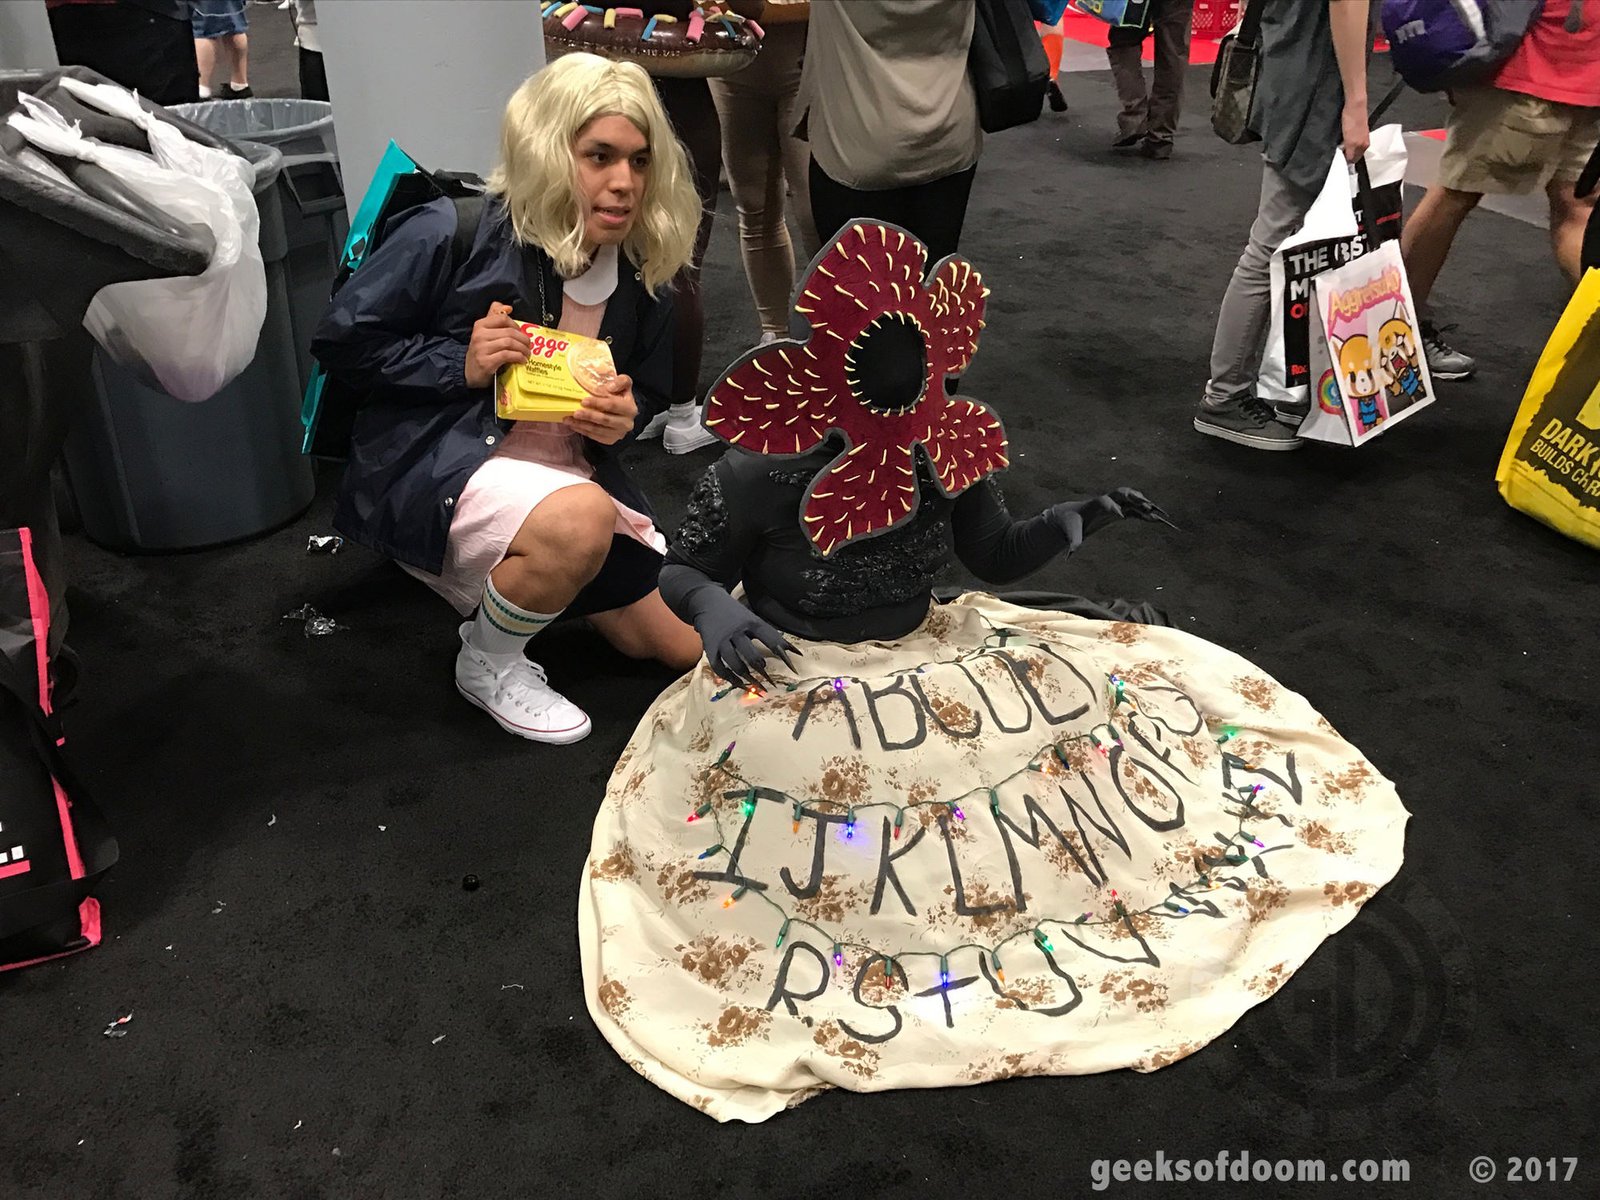 NYCC 2017 Cosplay: Eleven and Demogorgon from Stranger Things